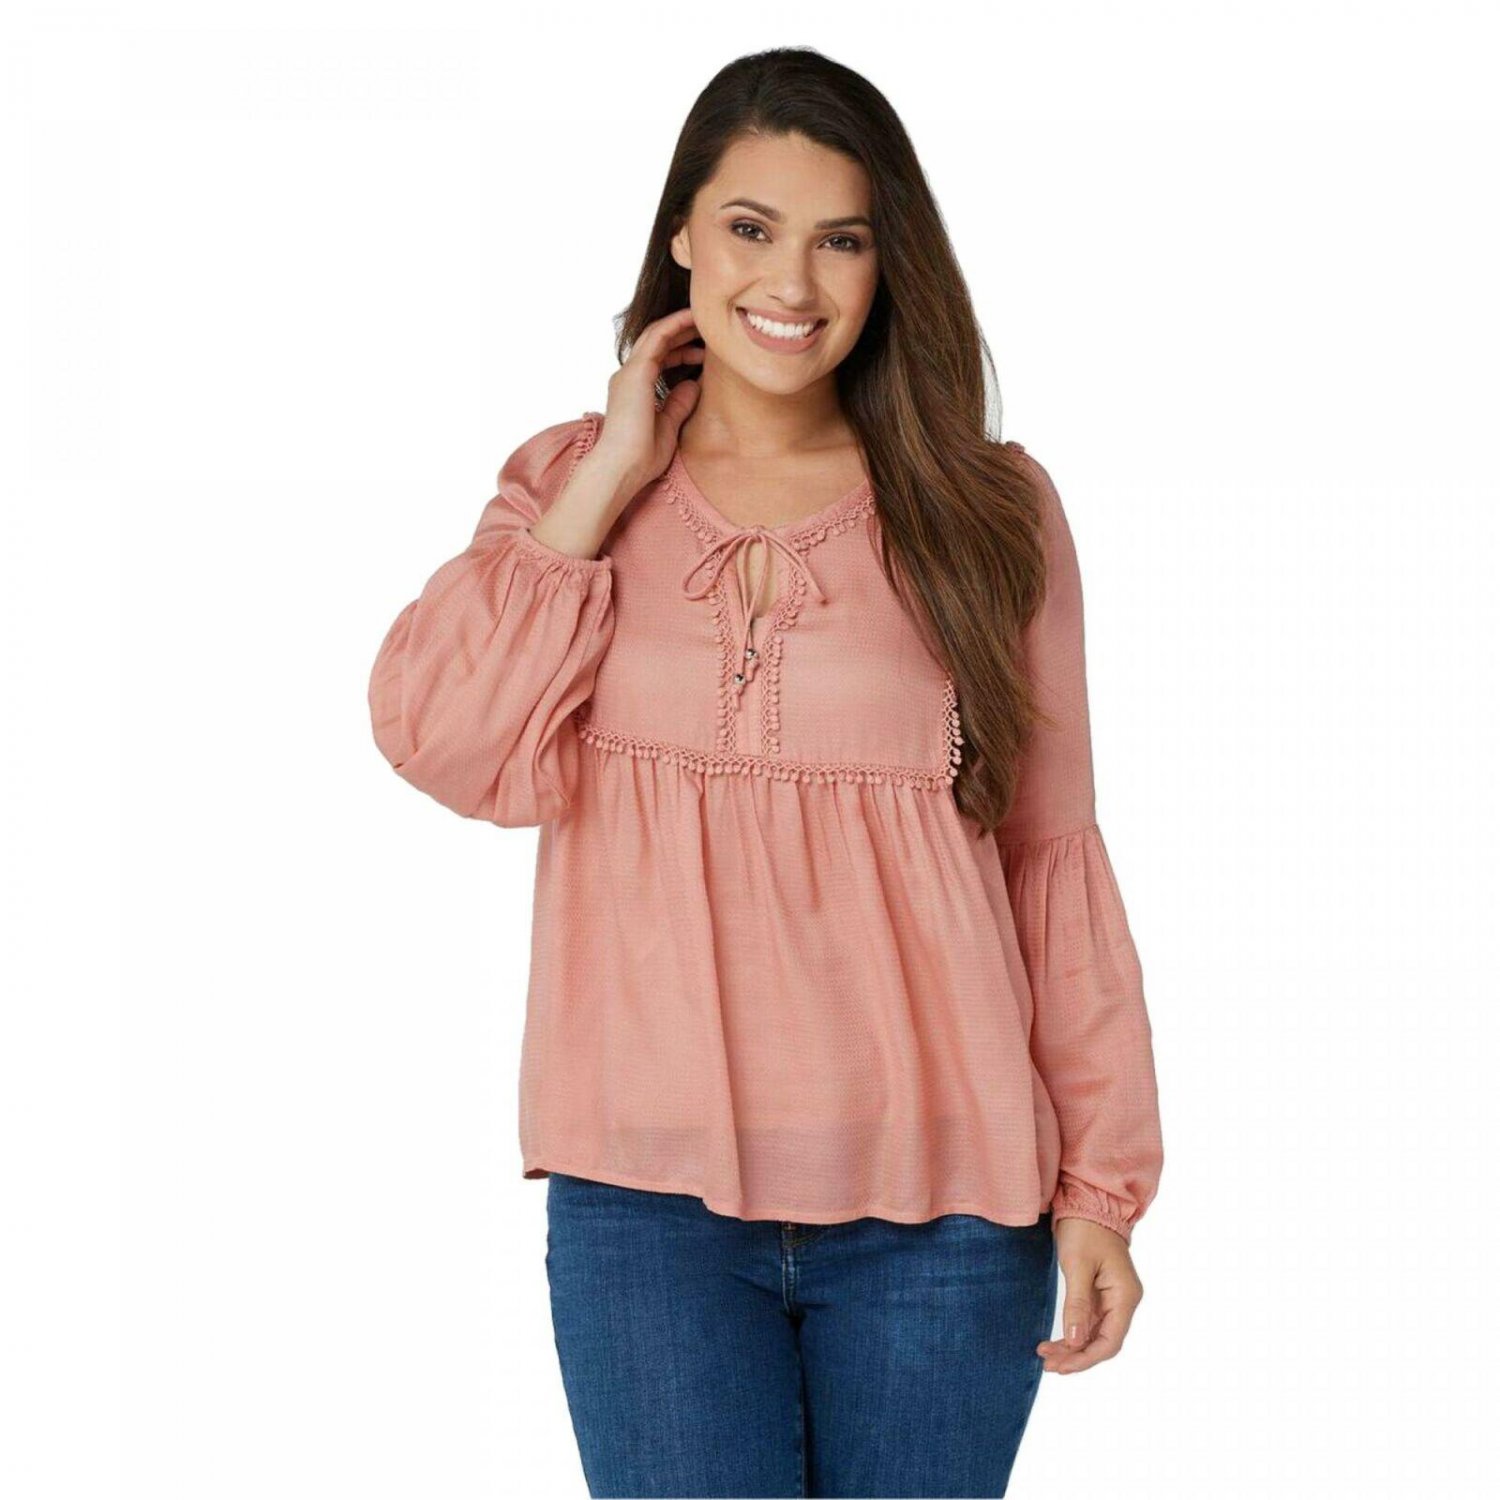 Haute Hippie Tribe Women's Avery Peasant Blouse with Tie Neck Detail Medium Rosette Pink